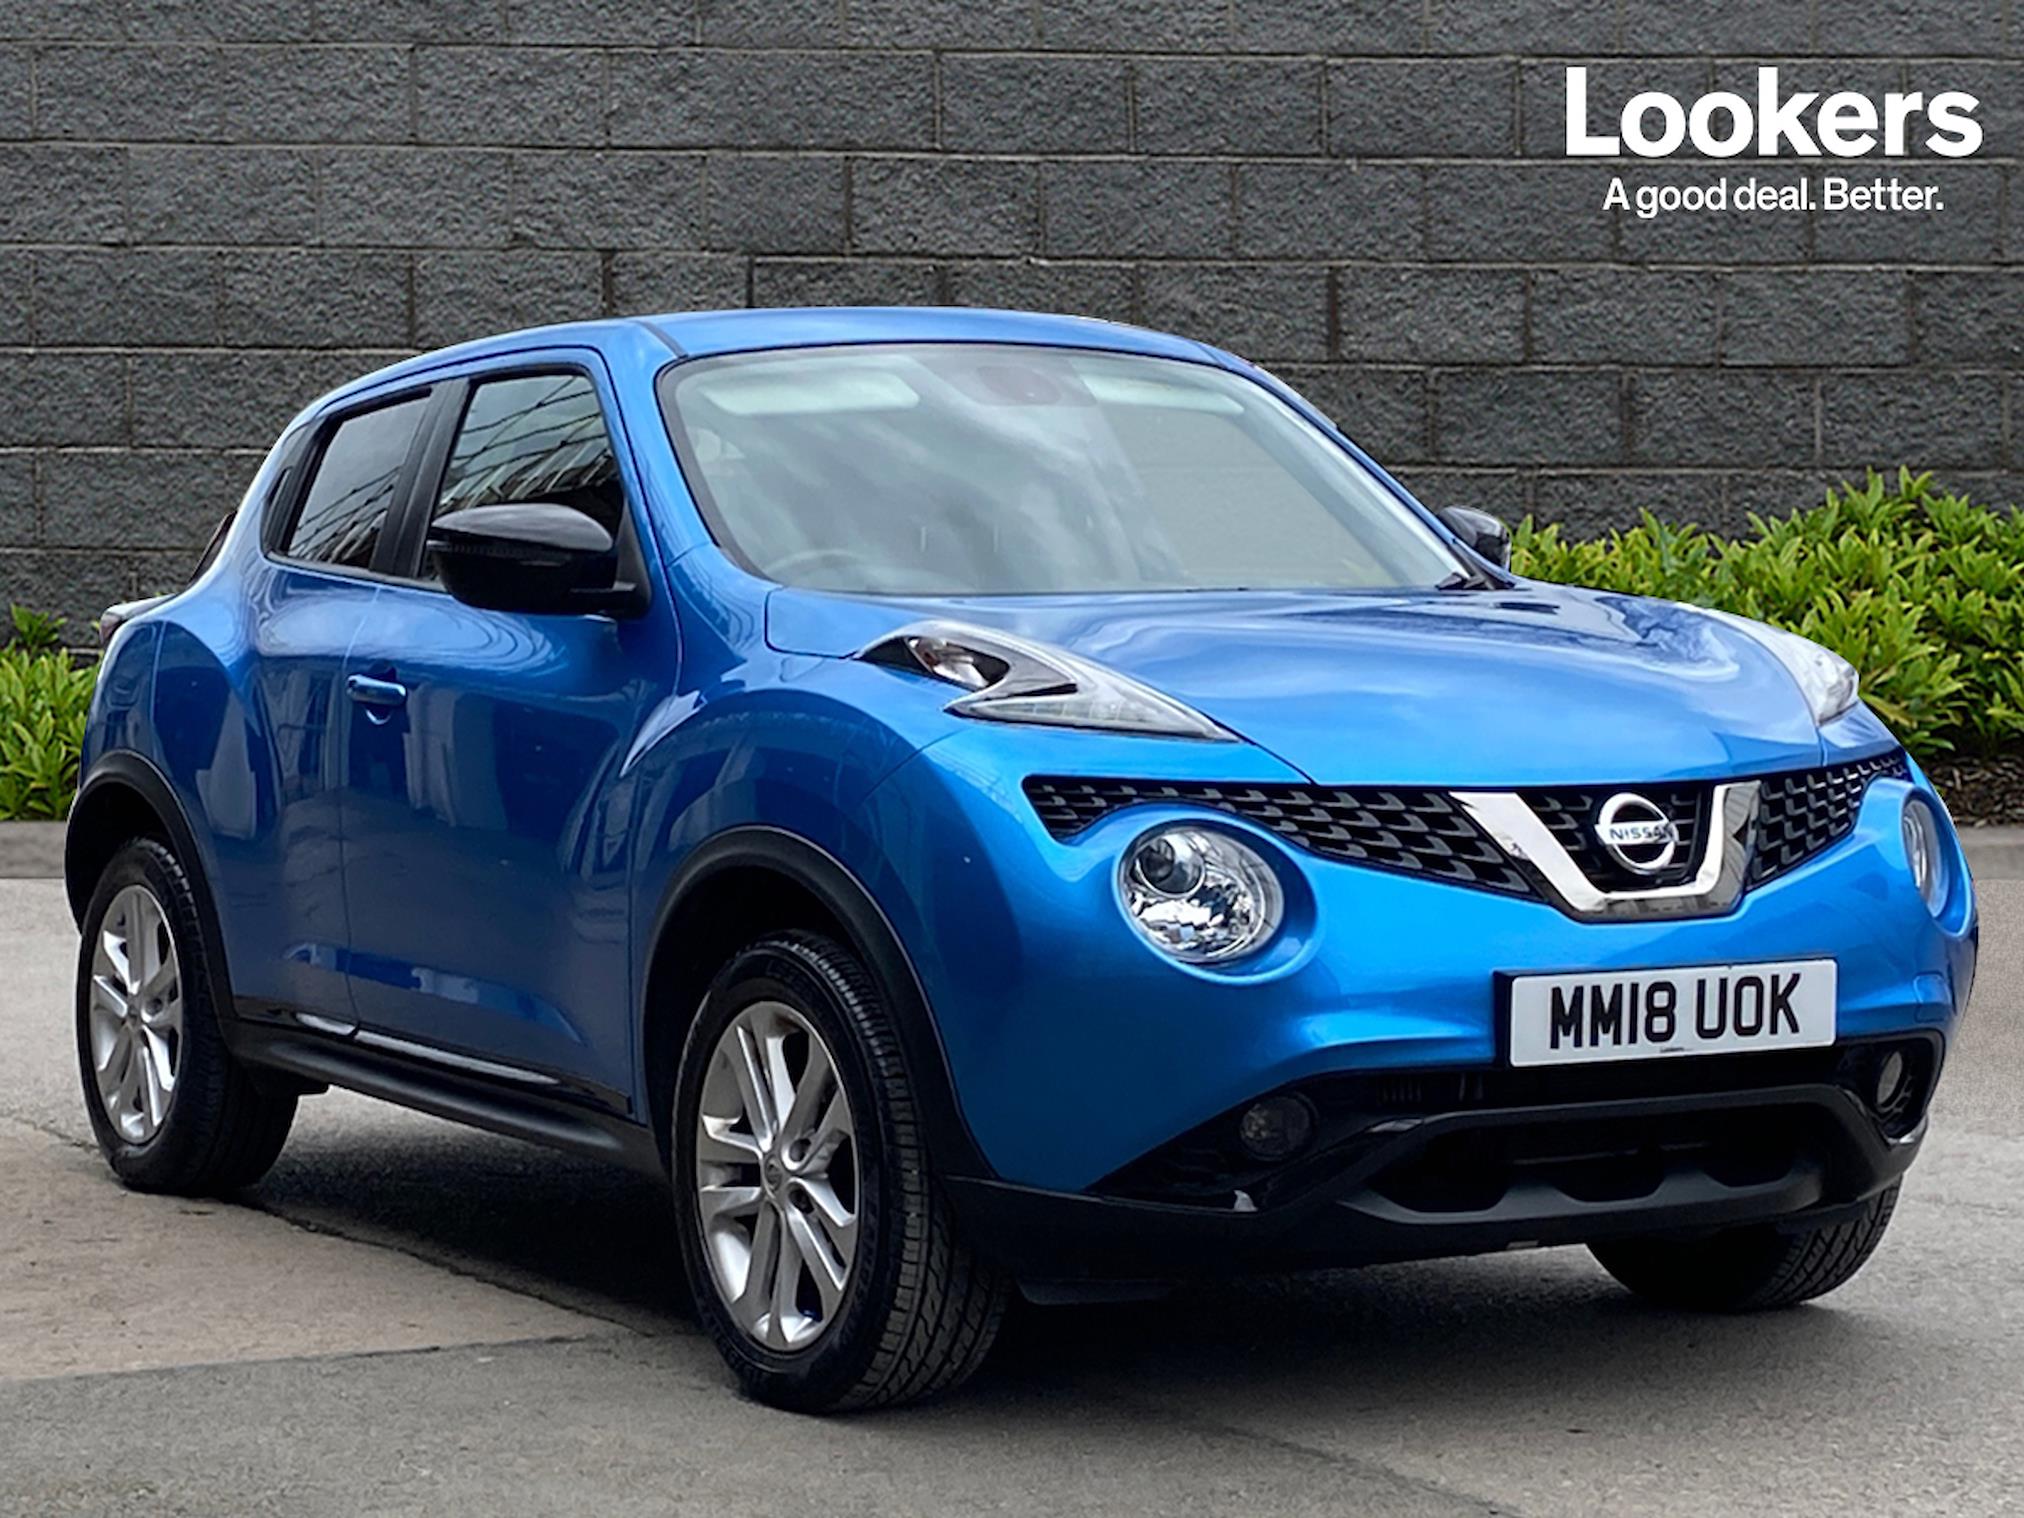 Used NISSAN JUKE 1.2 Dig-T Bose Personal Edition 5Dr 2018